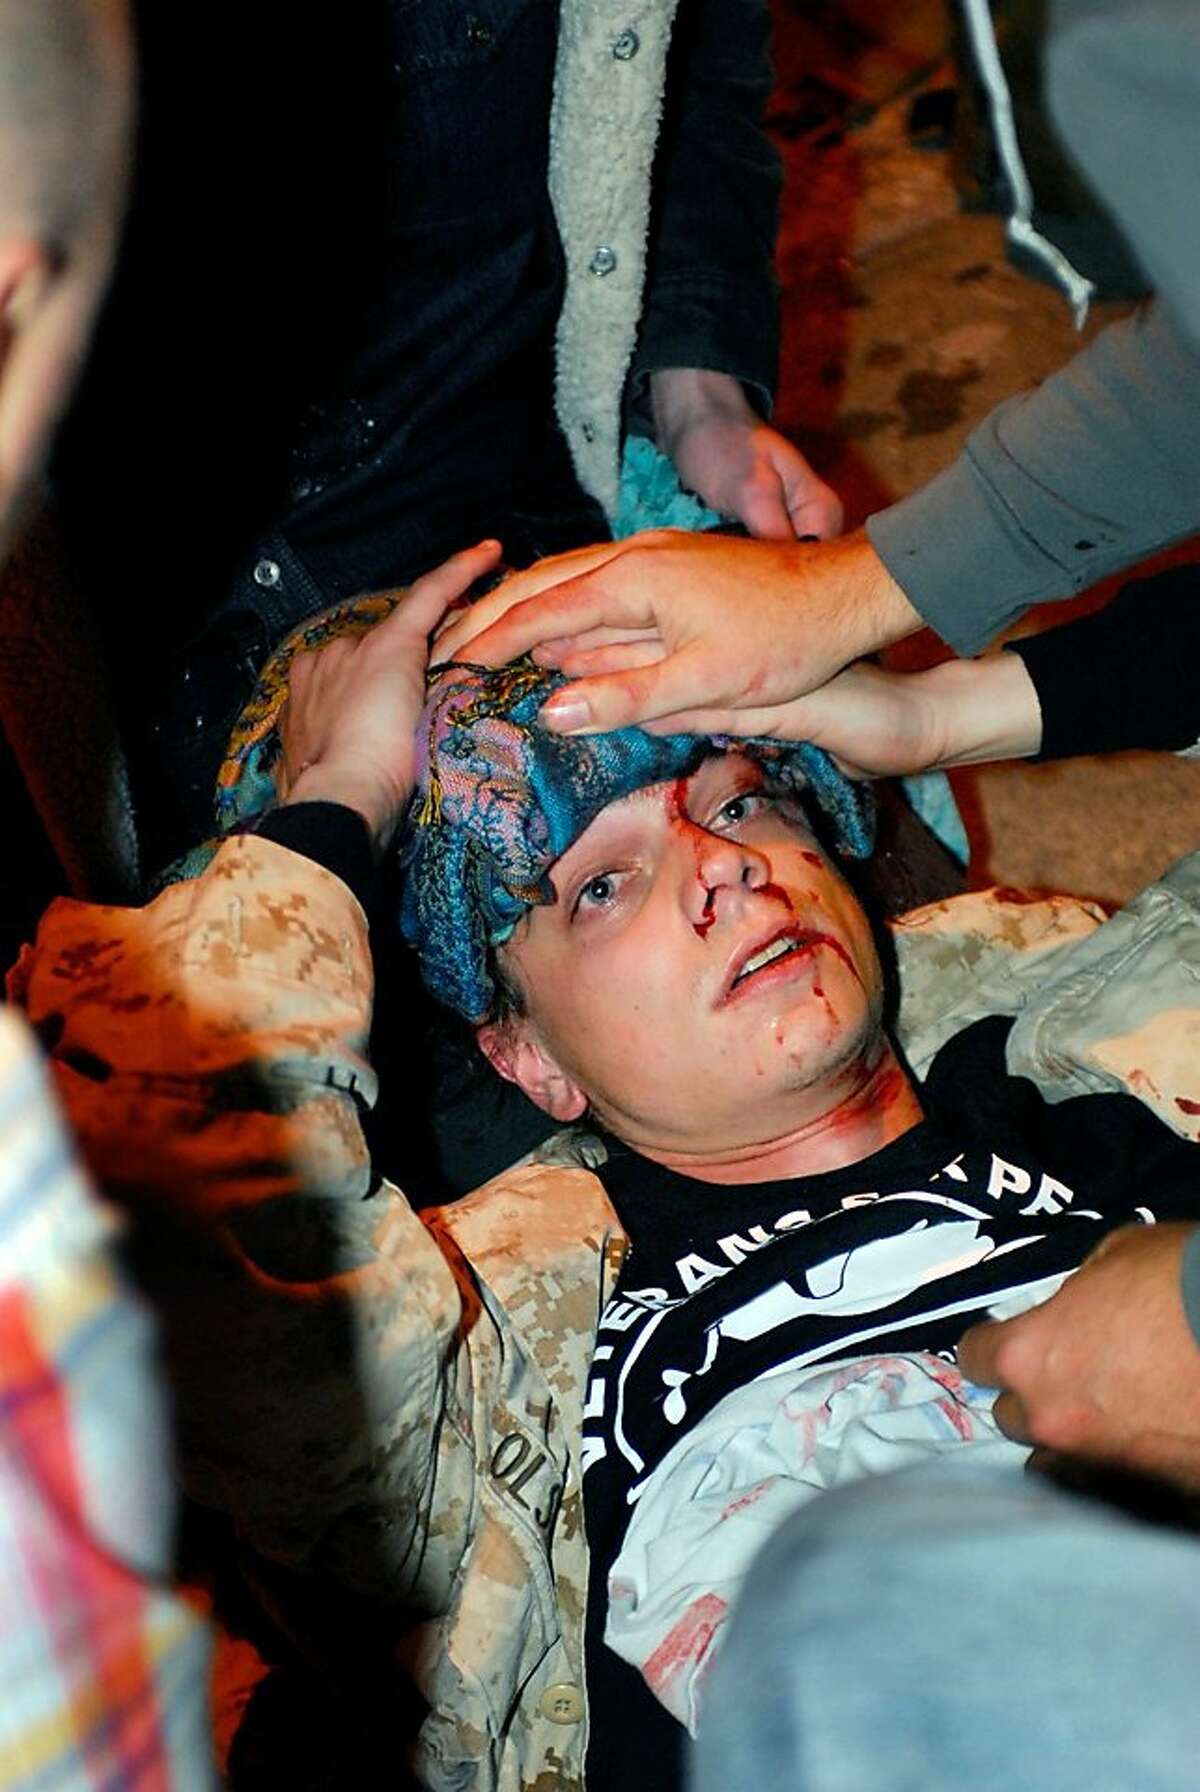 In this Oct. 25, 2011 photo, 24-year-old Iraq War veteran Scott Olsen lies on the ground bleeding from a head wound after being struck by a projectile during an Occupy Wall Street protest in Oakland, Calif. Olsen suffered a fractured skull while marching with other protesters attempting to reestablish a presence in the area of the disbanded camp, said Dottie Guy, of the Iraq Veterans Against the War. Police Chief Howard Jordan says an internal review board and local prosecutors have been asked to determine if officers on the scene used excessive force. (AP Photo/Jay Finneburgh) Ran on: 10-28-2011 Other protesters aid Olsen after he was hurt. Ran on: 10-28-2011 Other protesters aid Olsen after he was hurt.